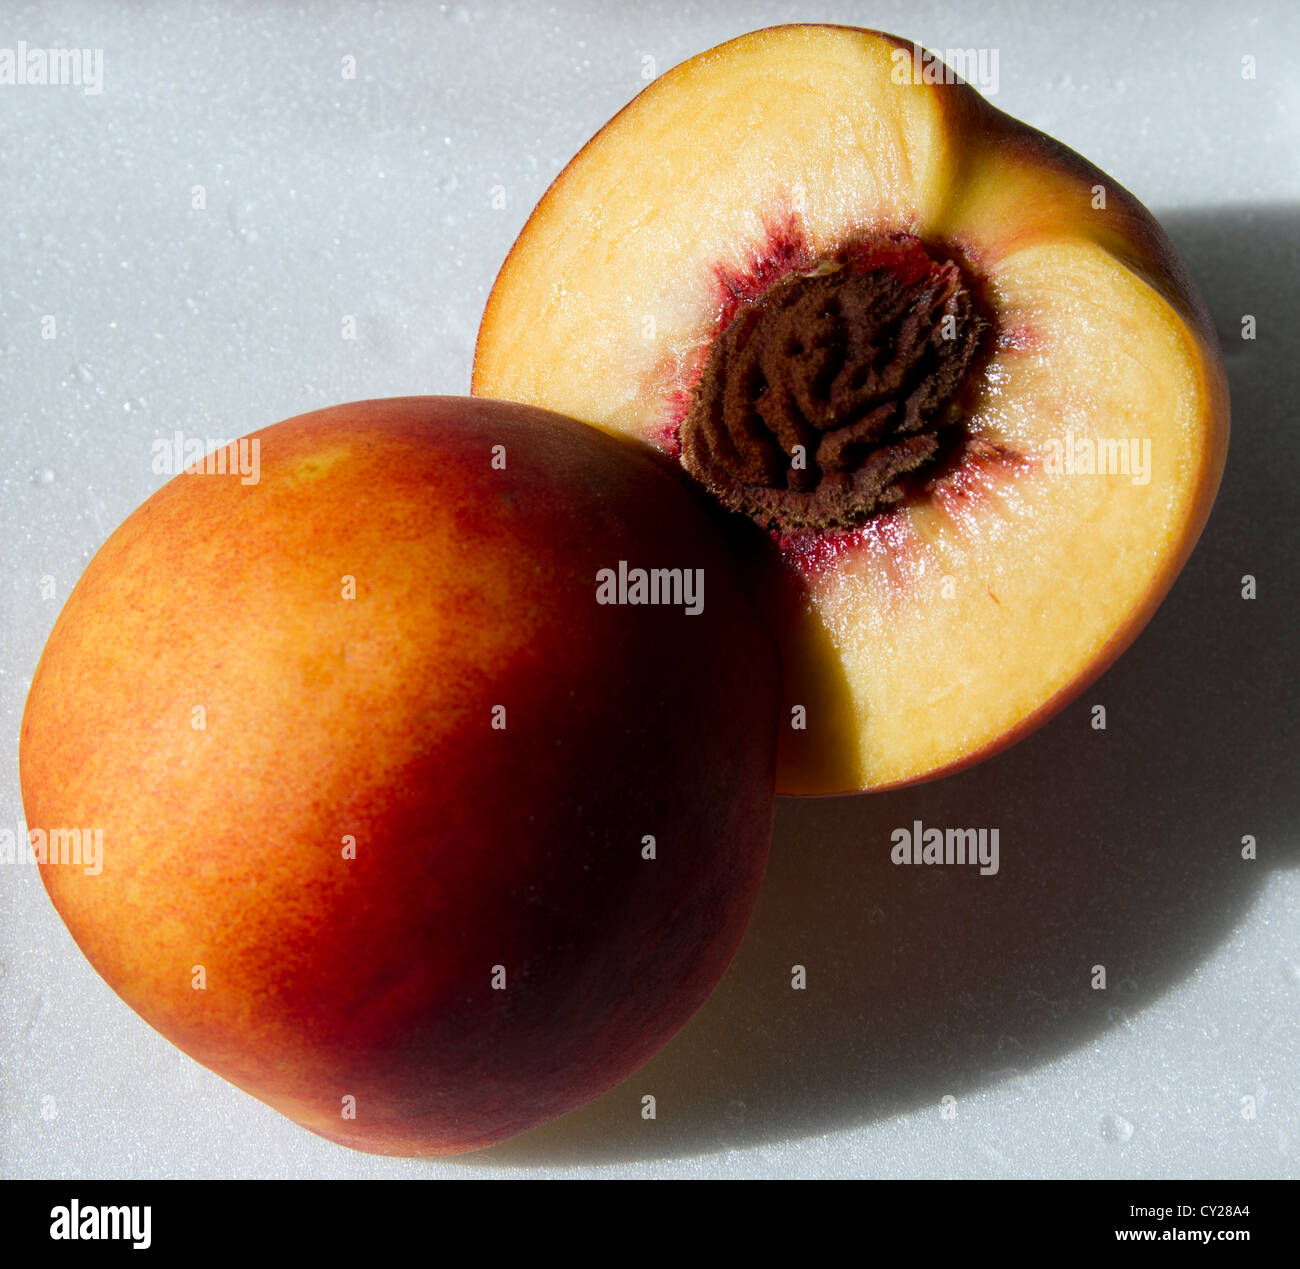 Peach in halves with stone visible. Stock Photo